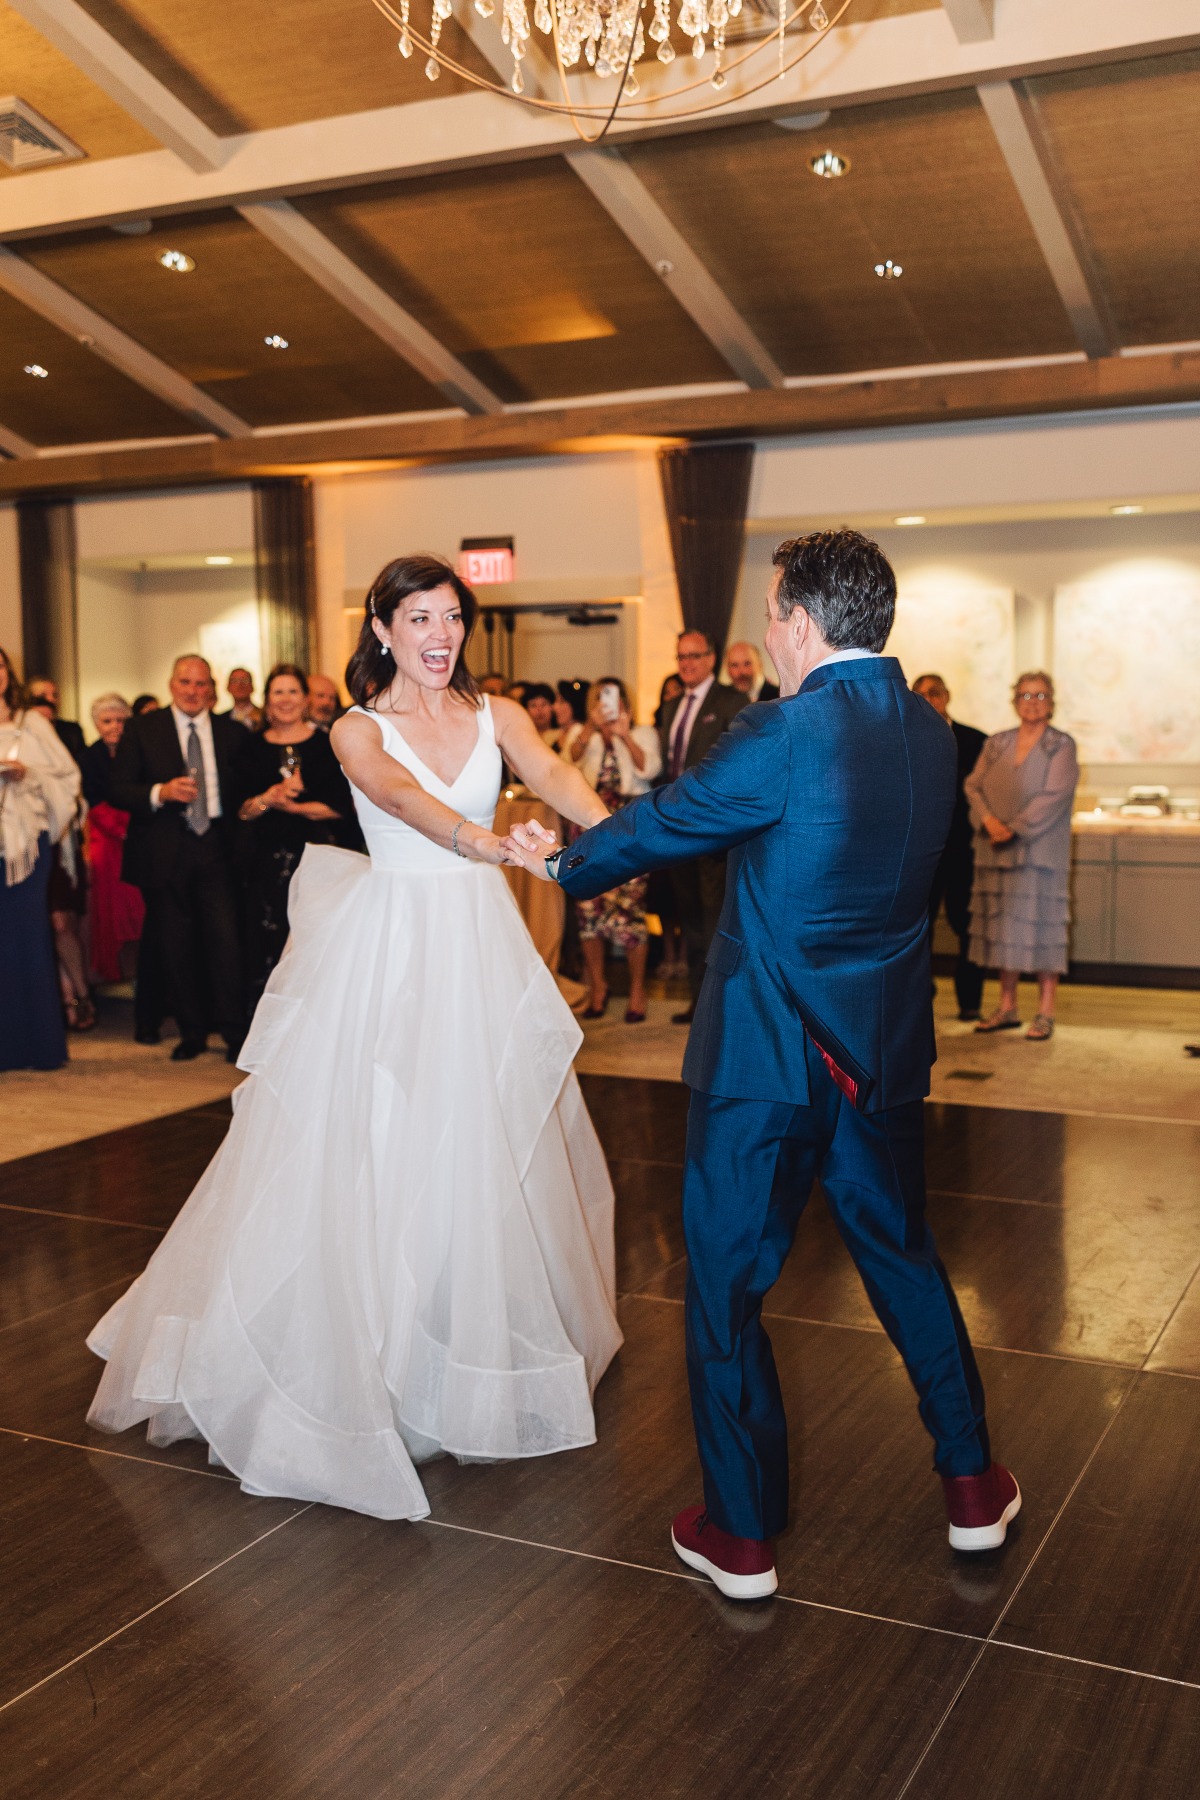 Playful indoor first dance at Carmel Valley wedding 